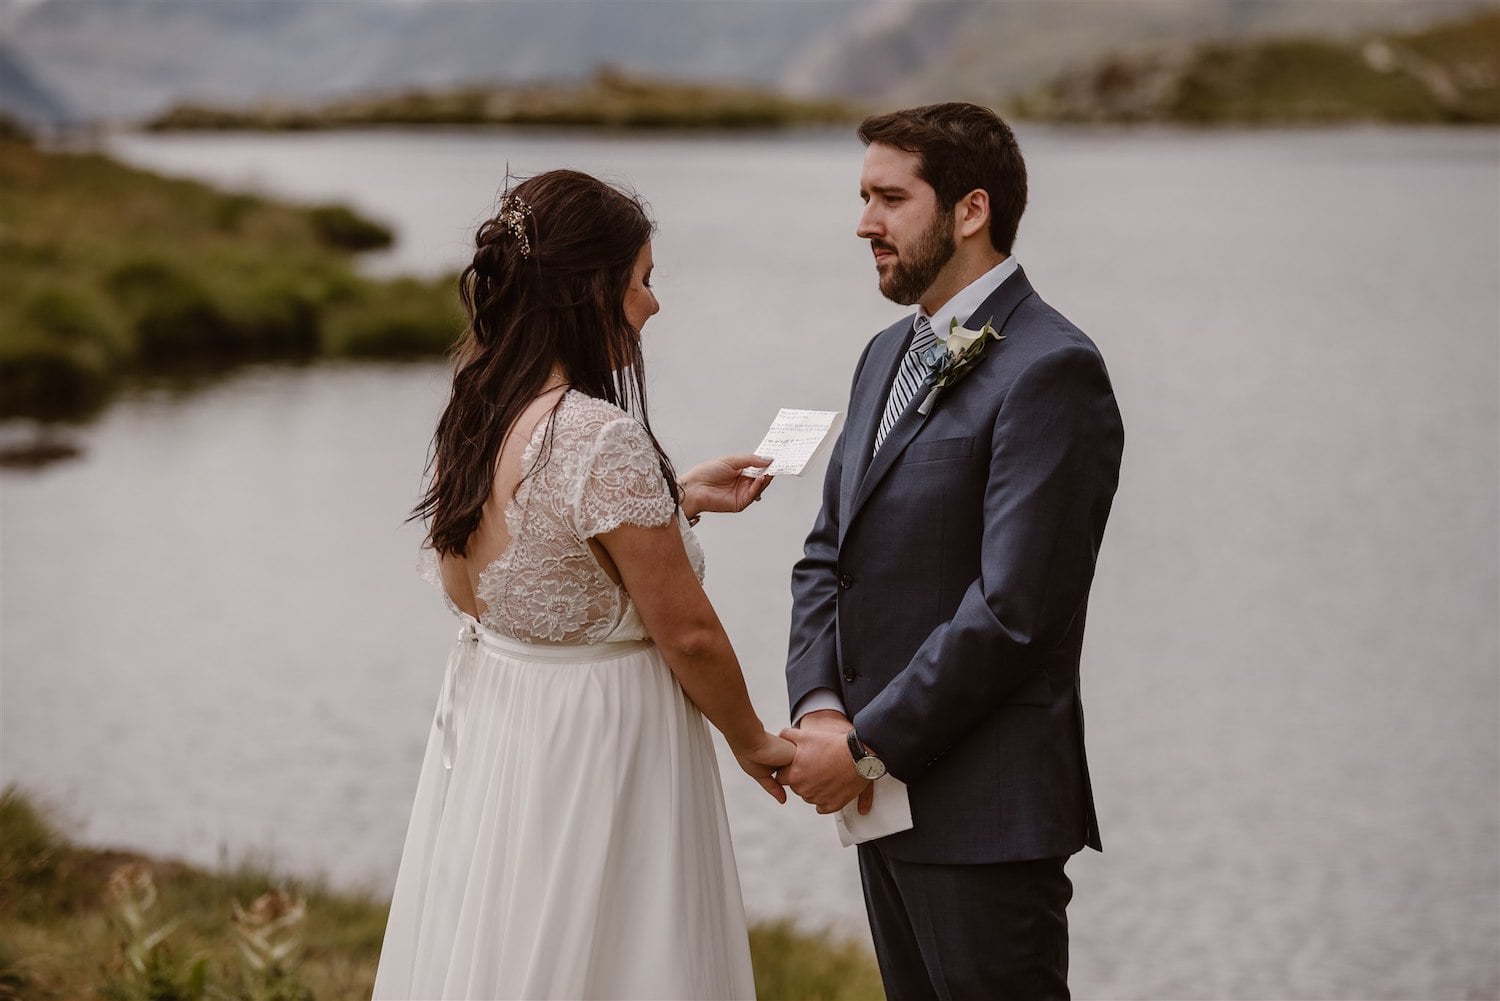 Couple exchanging vows during their elopement in Switzerland